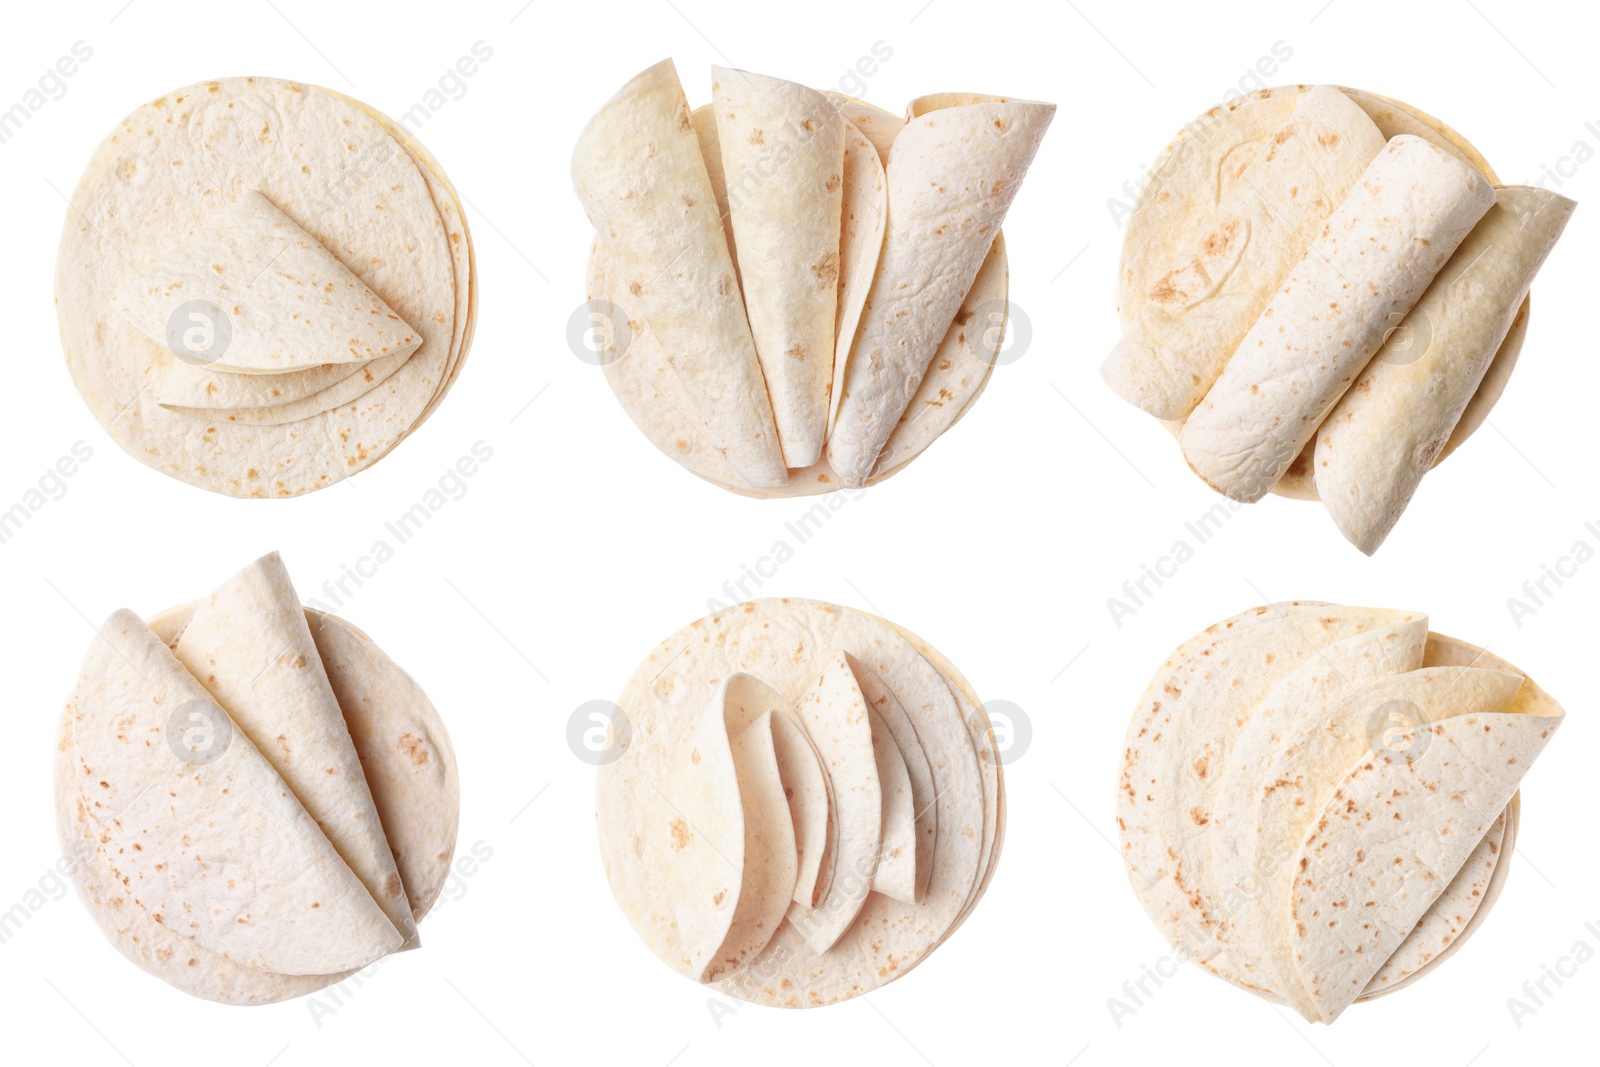 Image of Set of corn tortillas on white background, top view